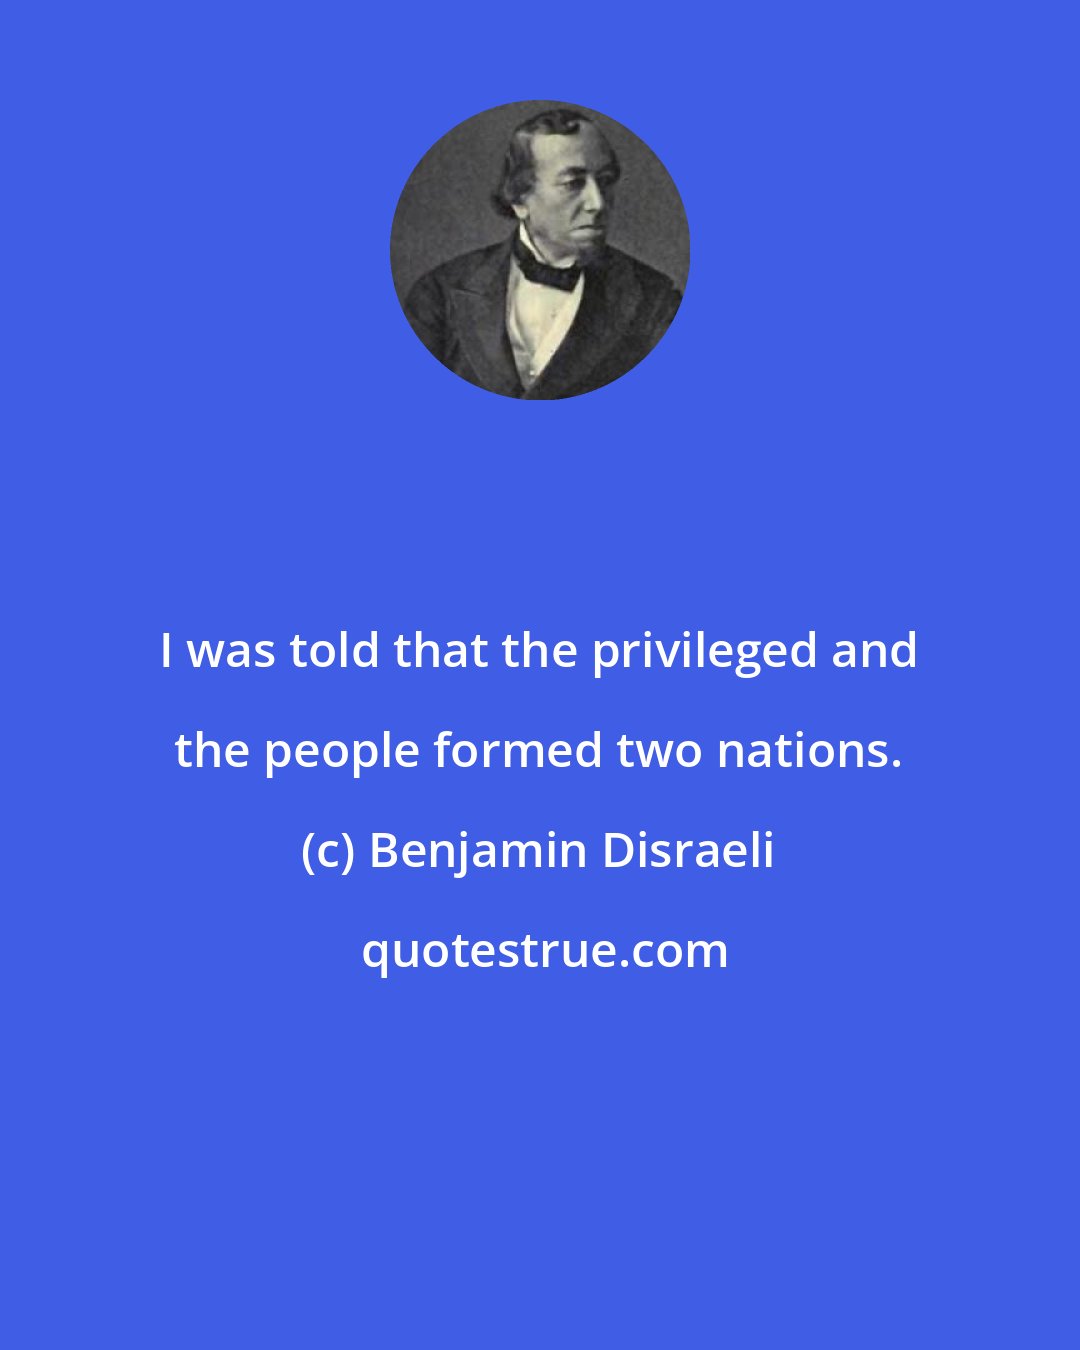 Benjamin Disraeli: I was told that the privileged and the people formed two nations.